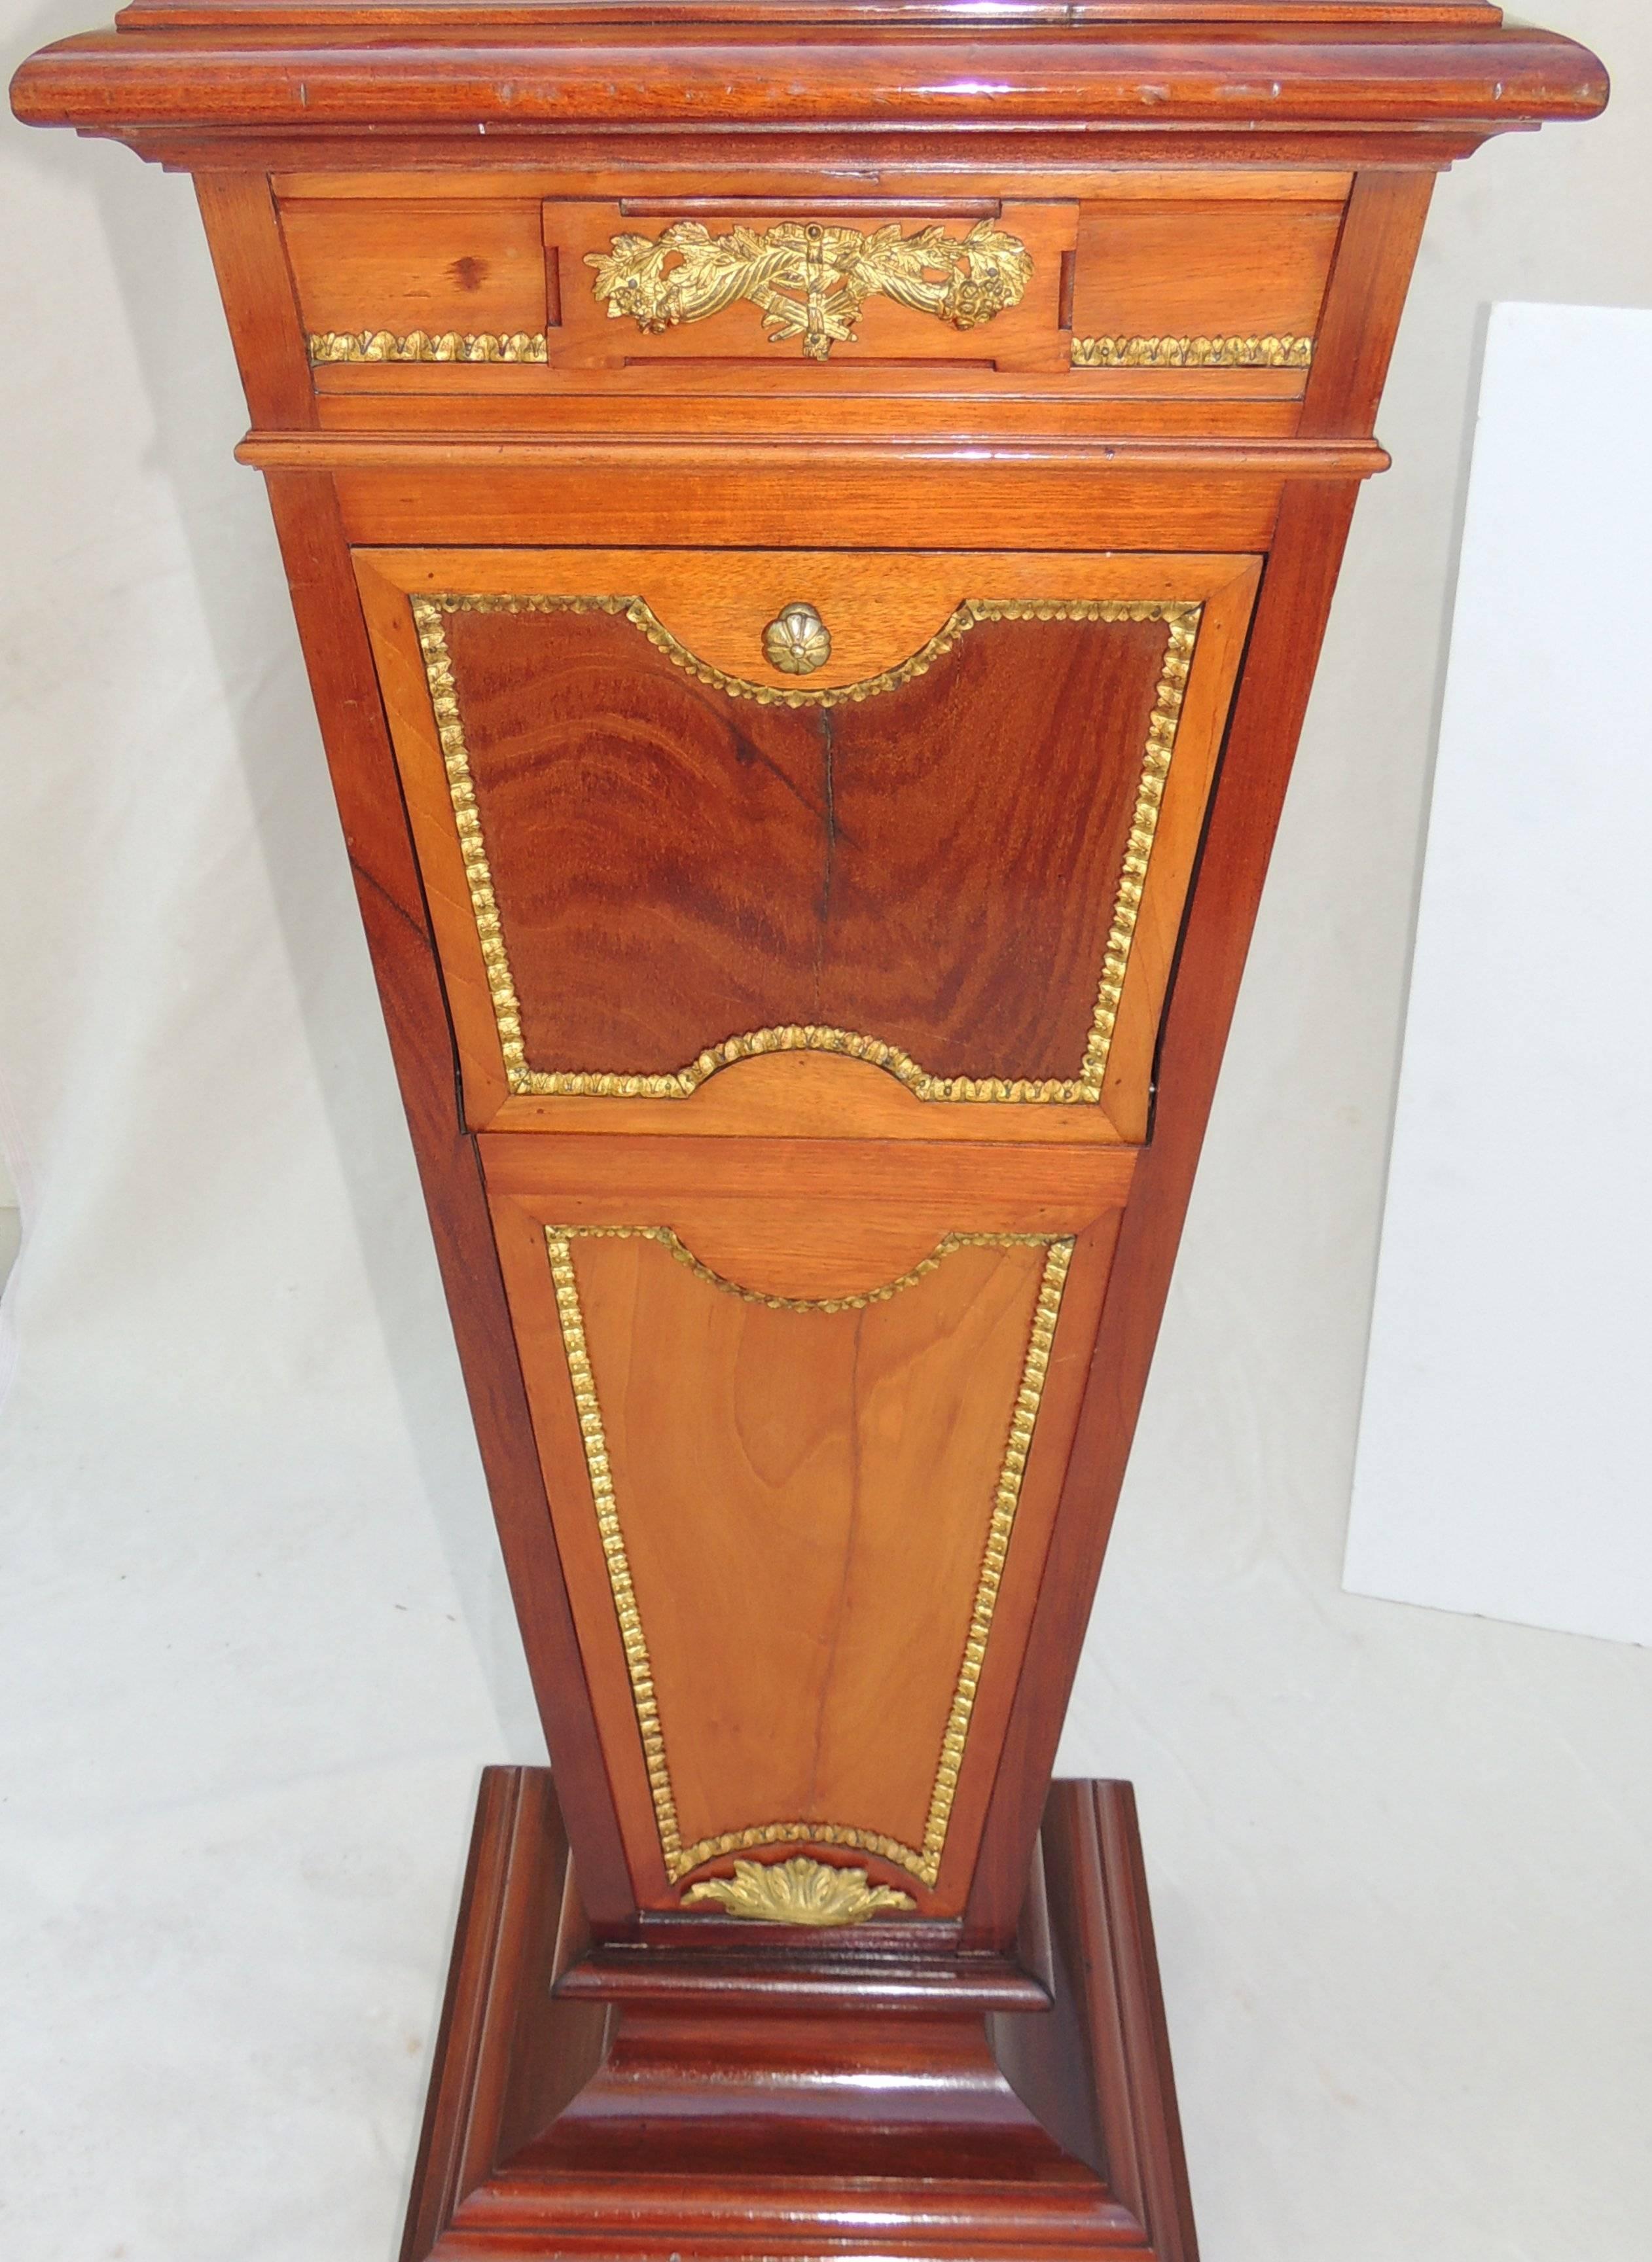 Wonderful French Ormolu Bronze-Mounted Mahogany Pedestal Marble-Top Drawers For Sale 3